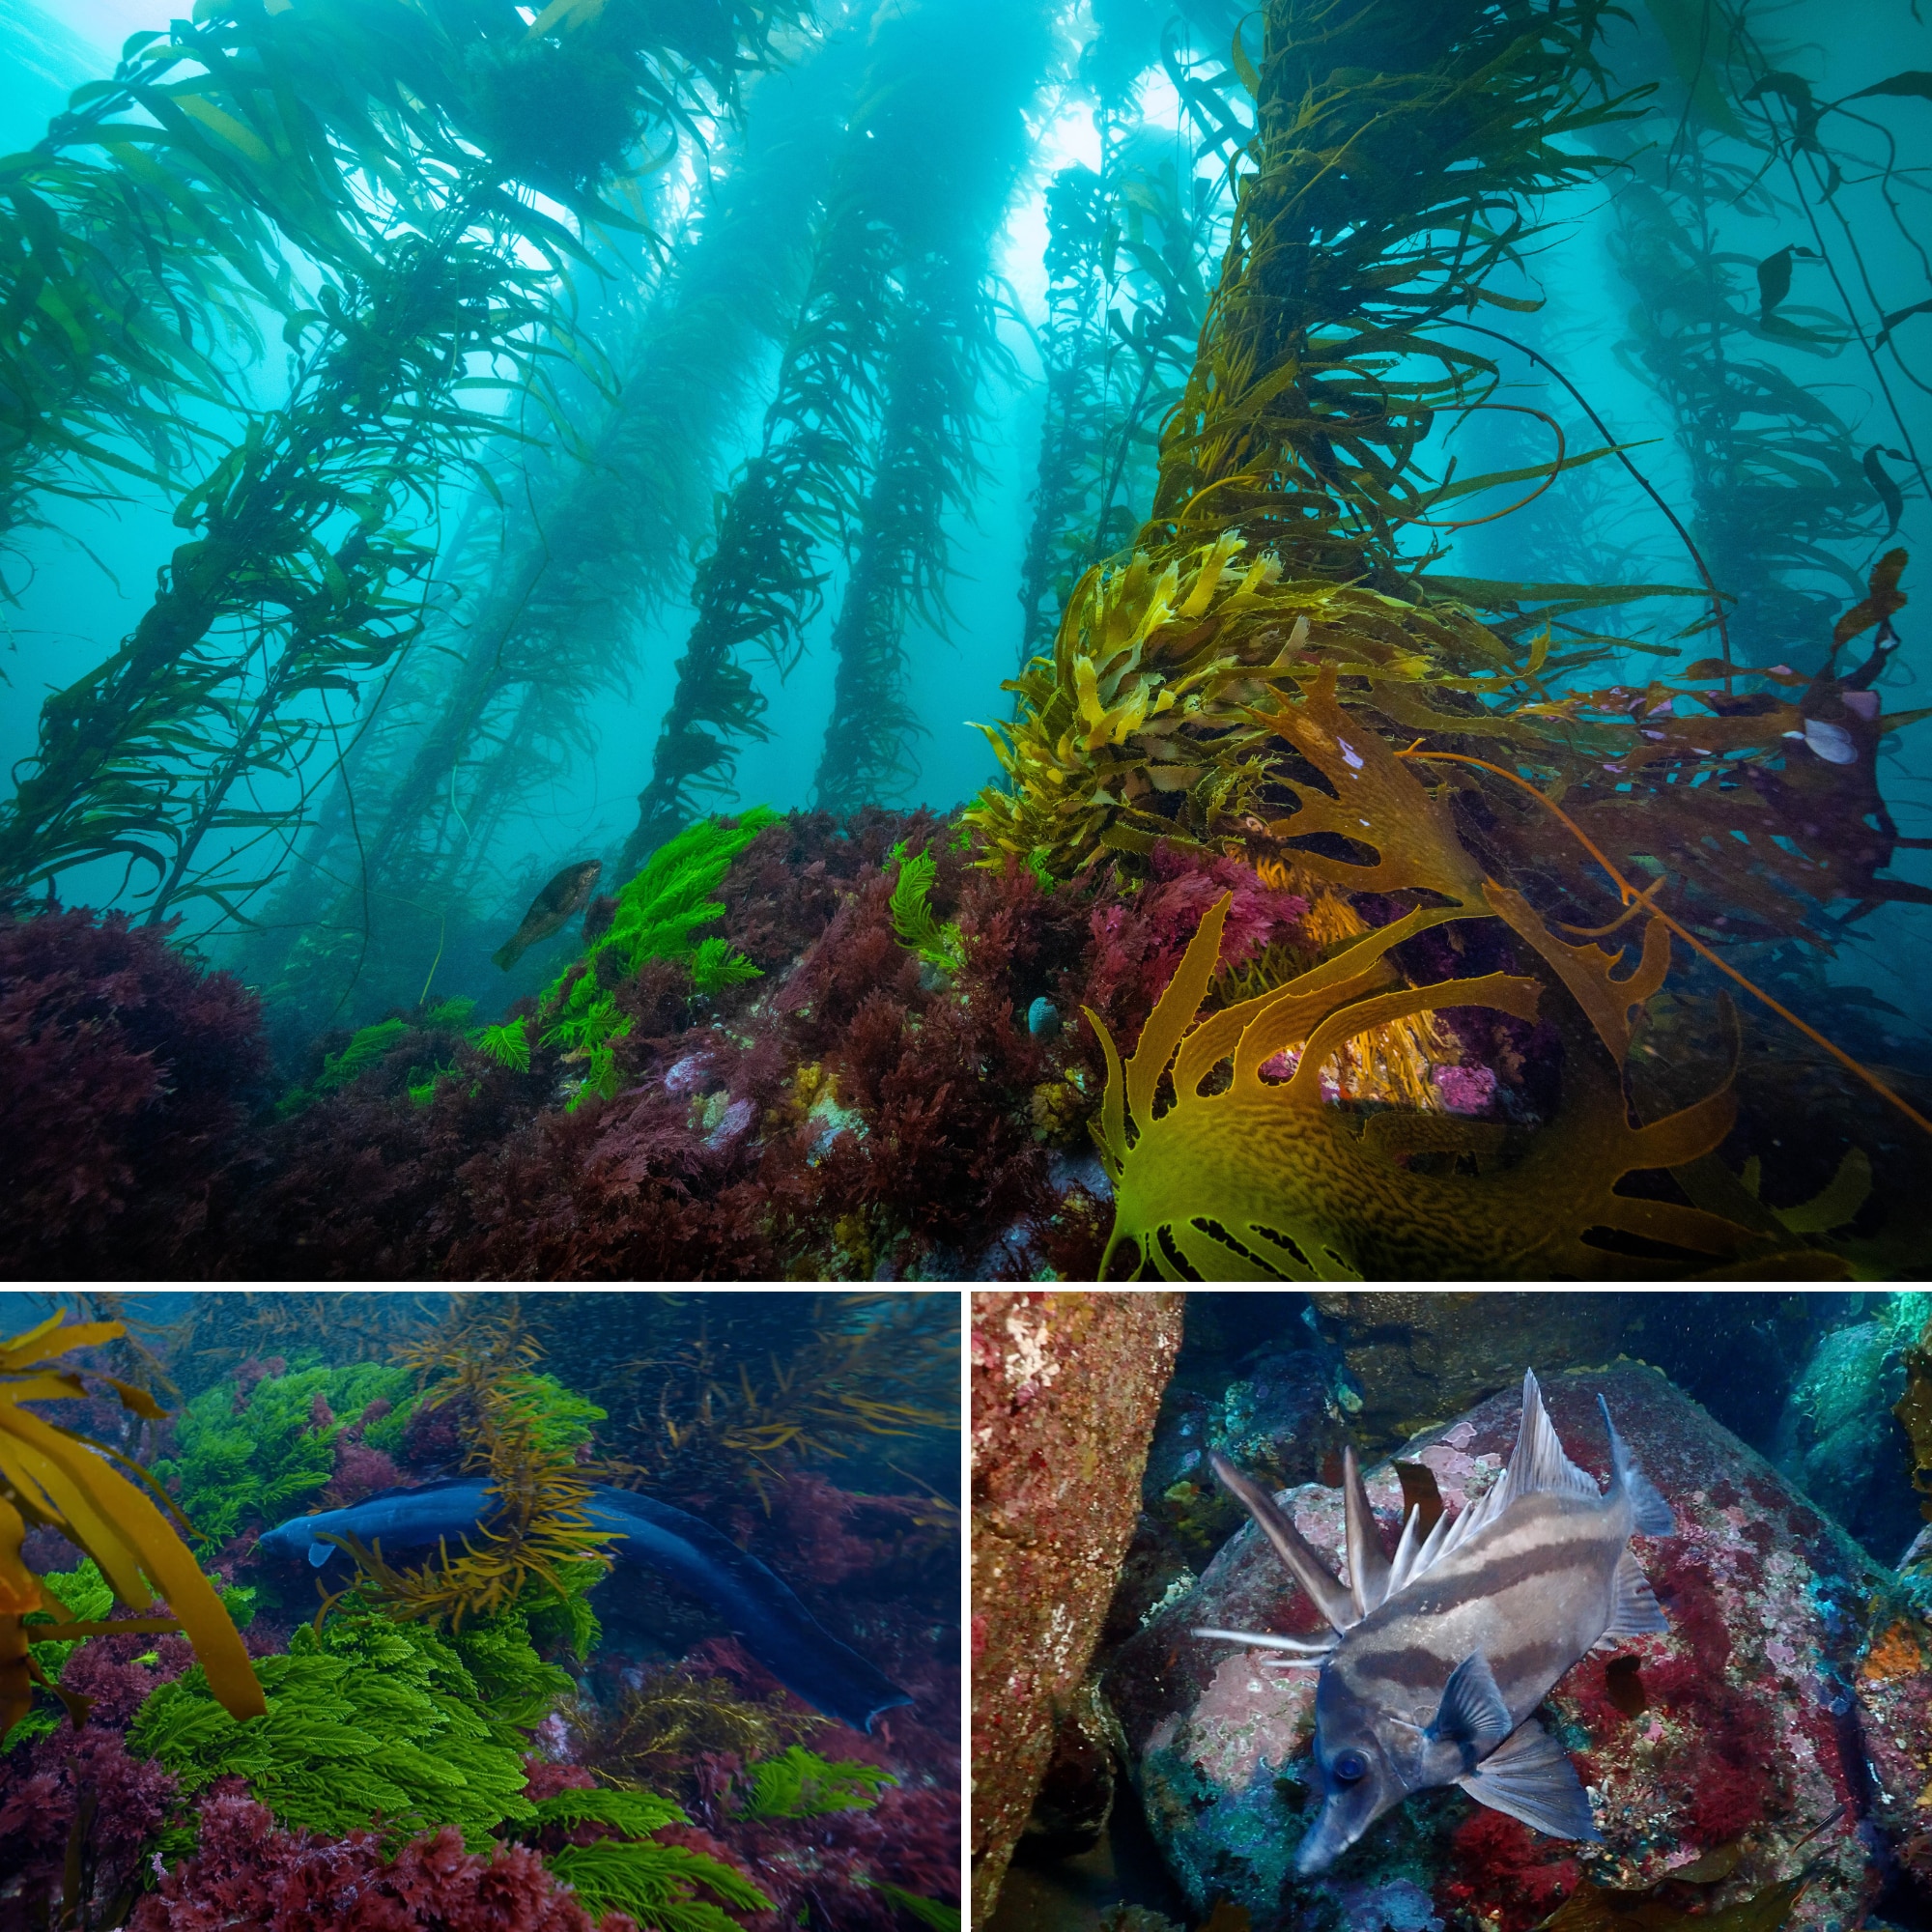 Three colourful underwater photos of seaweed species, a blue eel and a small fish